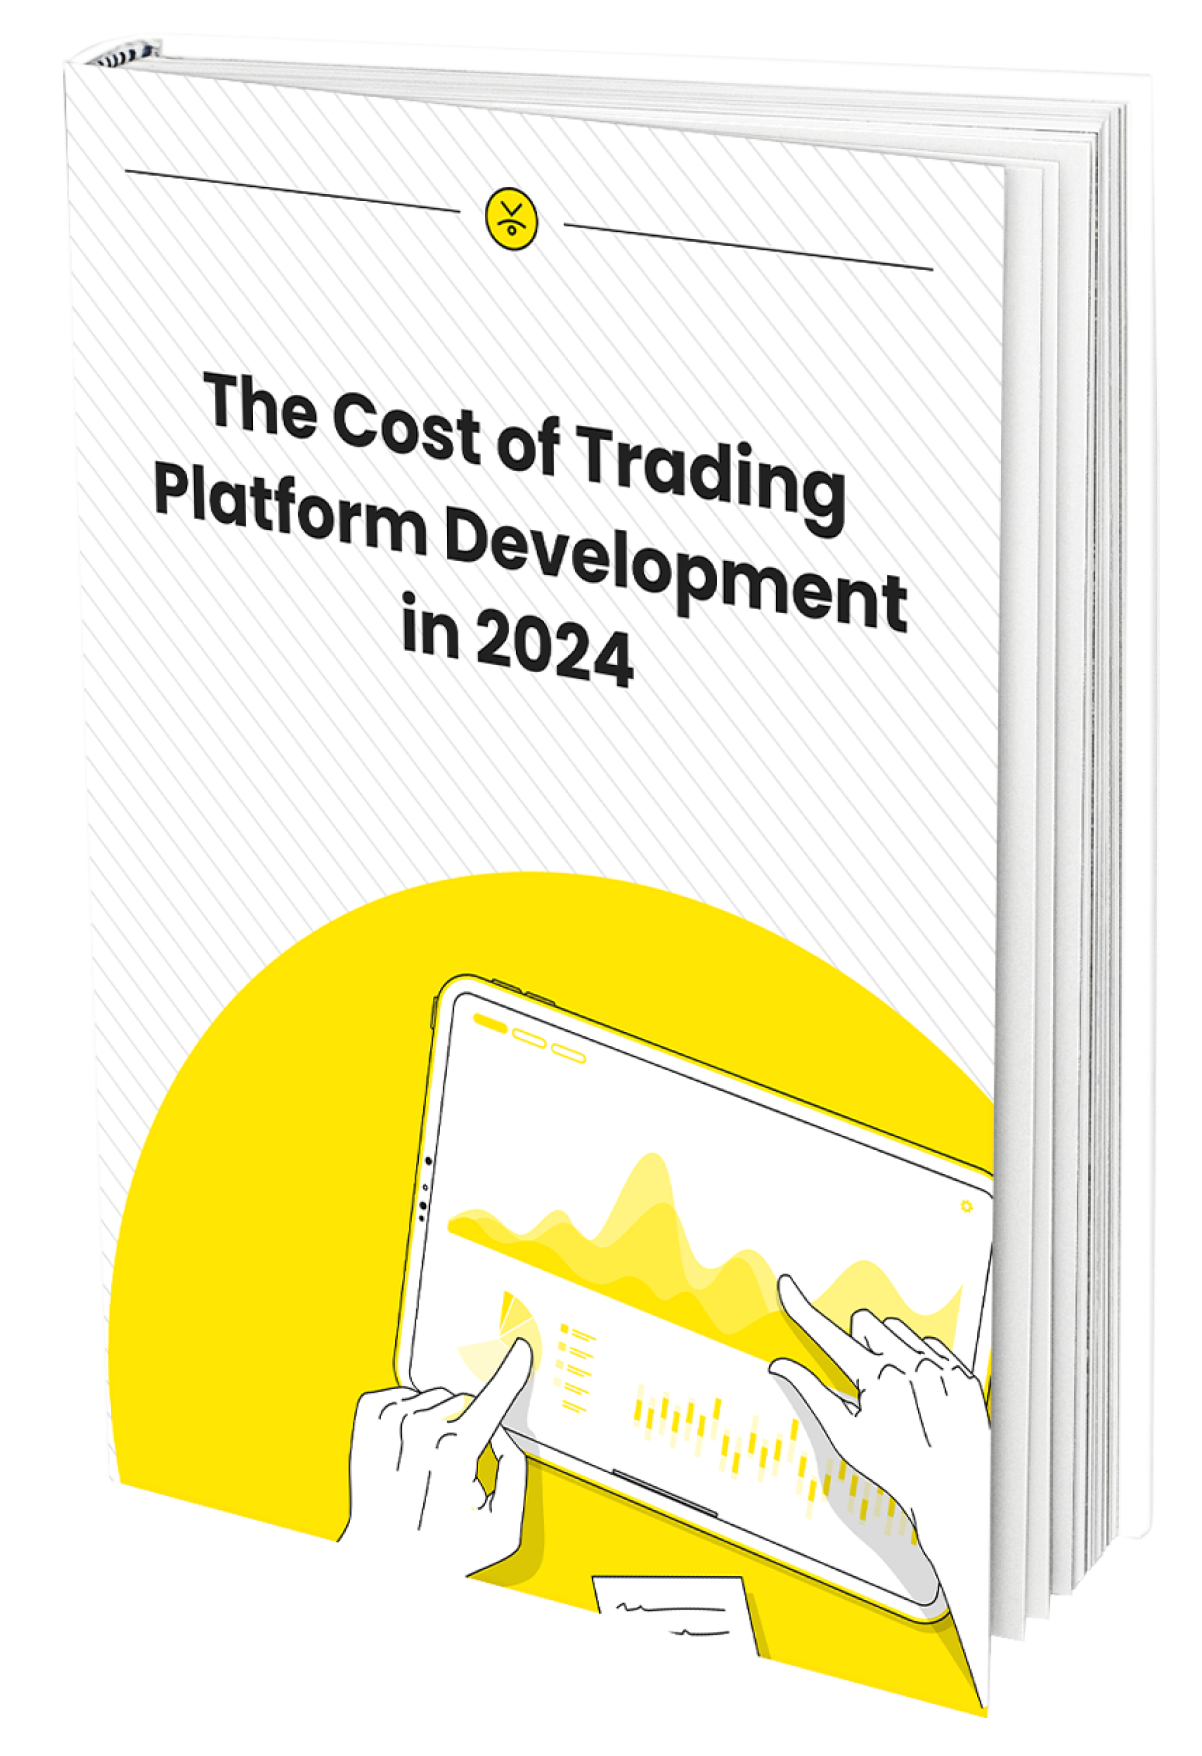 The Cost of Trading Platform Development in 2023 image